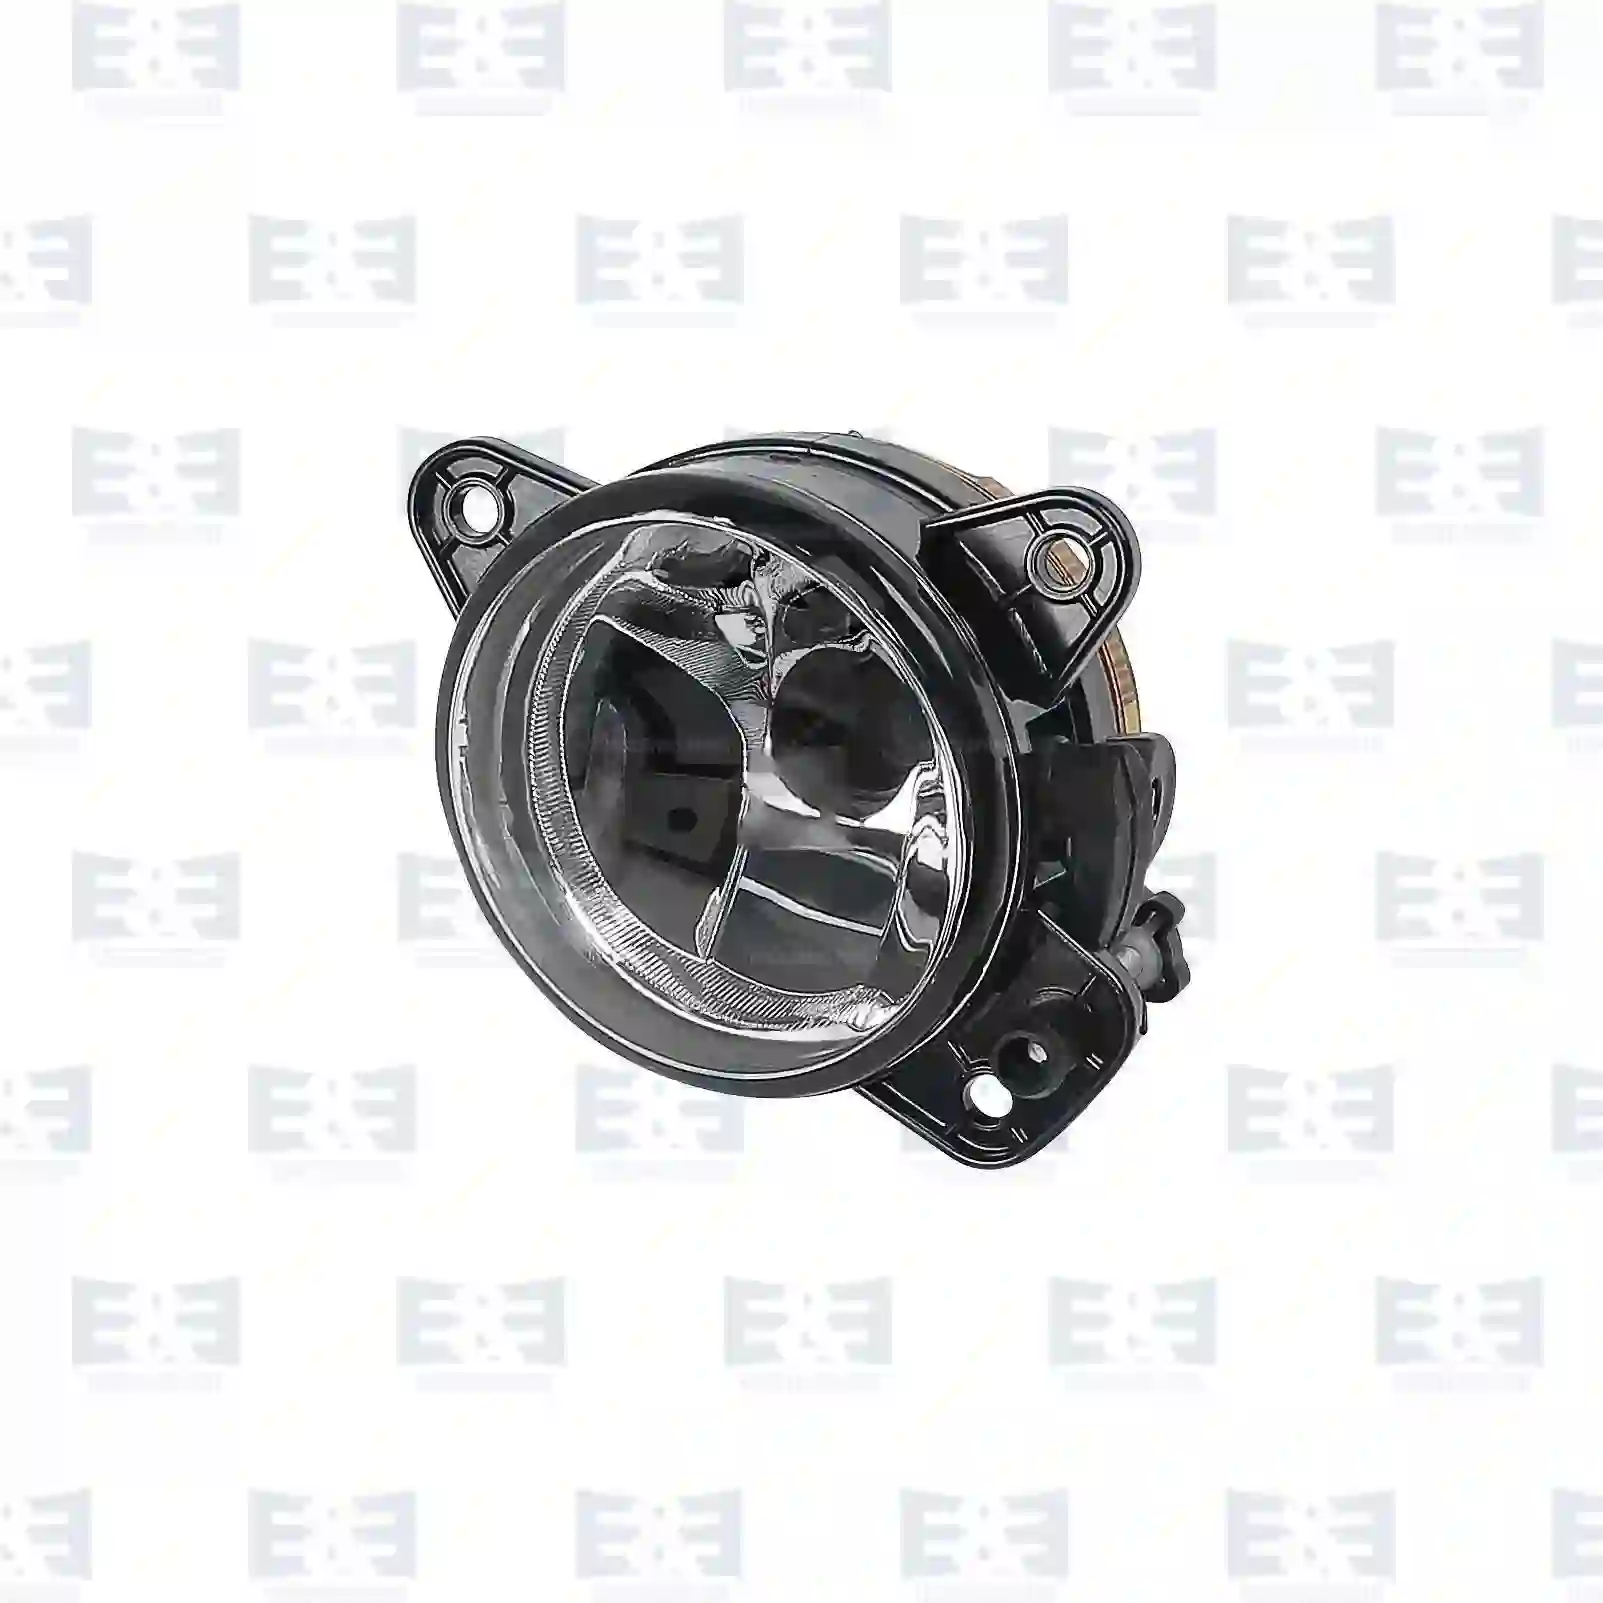 Fog lamp, right, without lamp carrier, 2E2298419, 7E0941700, 7H0941700, 7H0941700B, 7H0941700C, 7E0941700, 7E0941700B, 7H0941700, 7H0941700B, 7H0941700C ||  2E2298419 E&E Truck Spare Parts | Truck Spare Parts, Auotomotive Spare Parts Fog lamp, right, without lamp carrier, 2E2298419, 7E0941700, 7H0941700, 7H0941700B, 7H0941700C, 7E0941700, 7E0941700B, 7H0941700, 7H0941700B, 7H0941700C ||  2E2298419 E&E Truck Spare Parts | Truck Spare Parts, Auotomotive Spare Parts